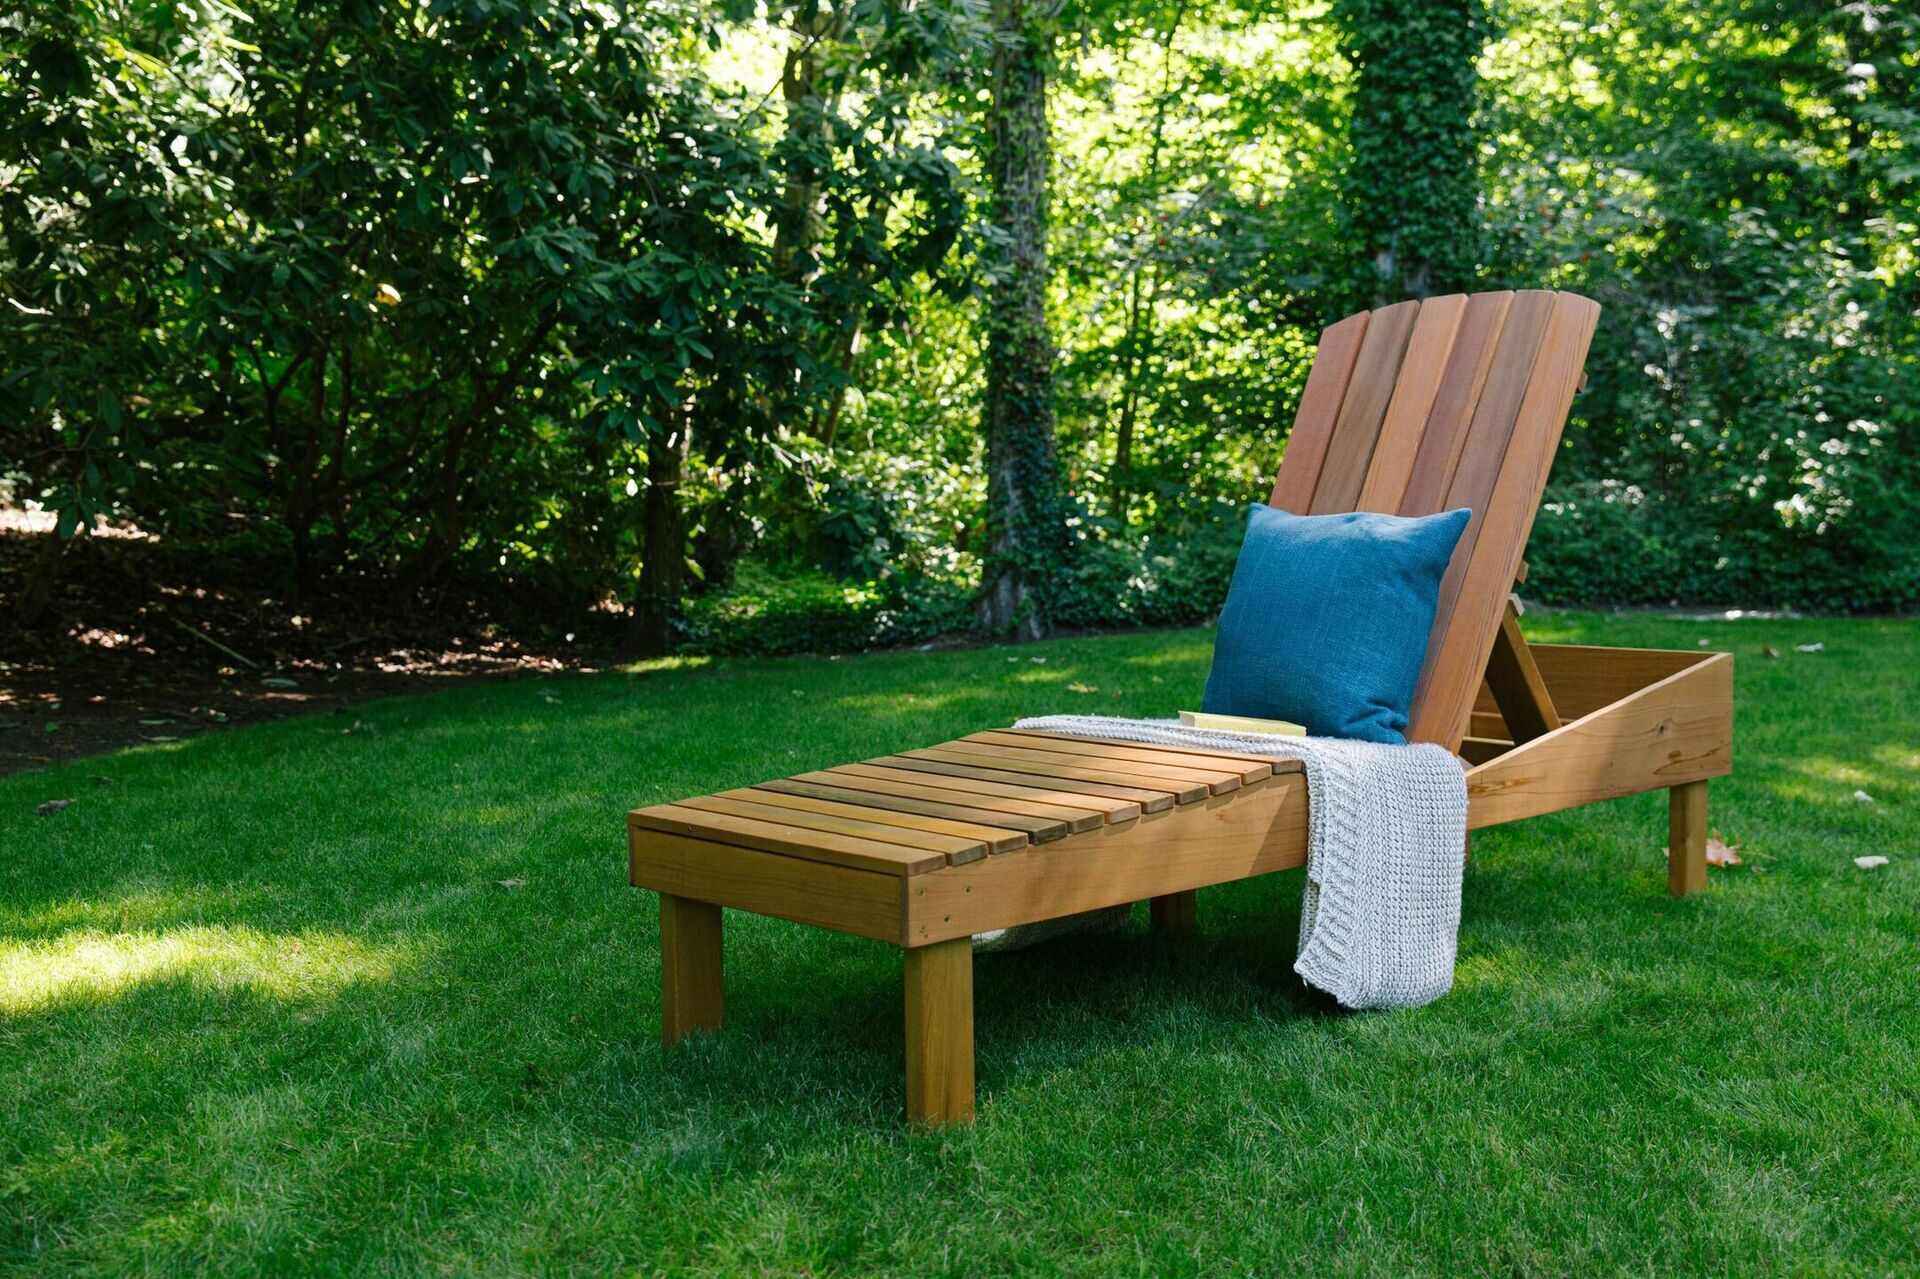 How To Build An Outdoor Lounge Chair